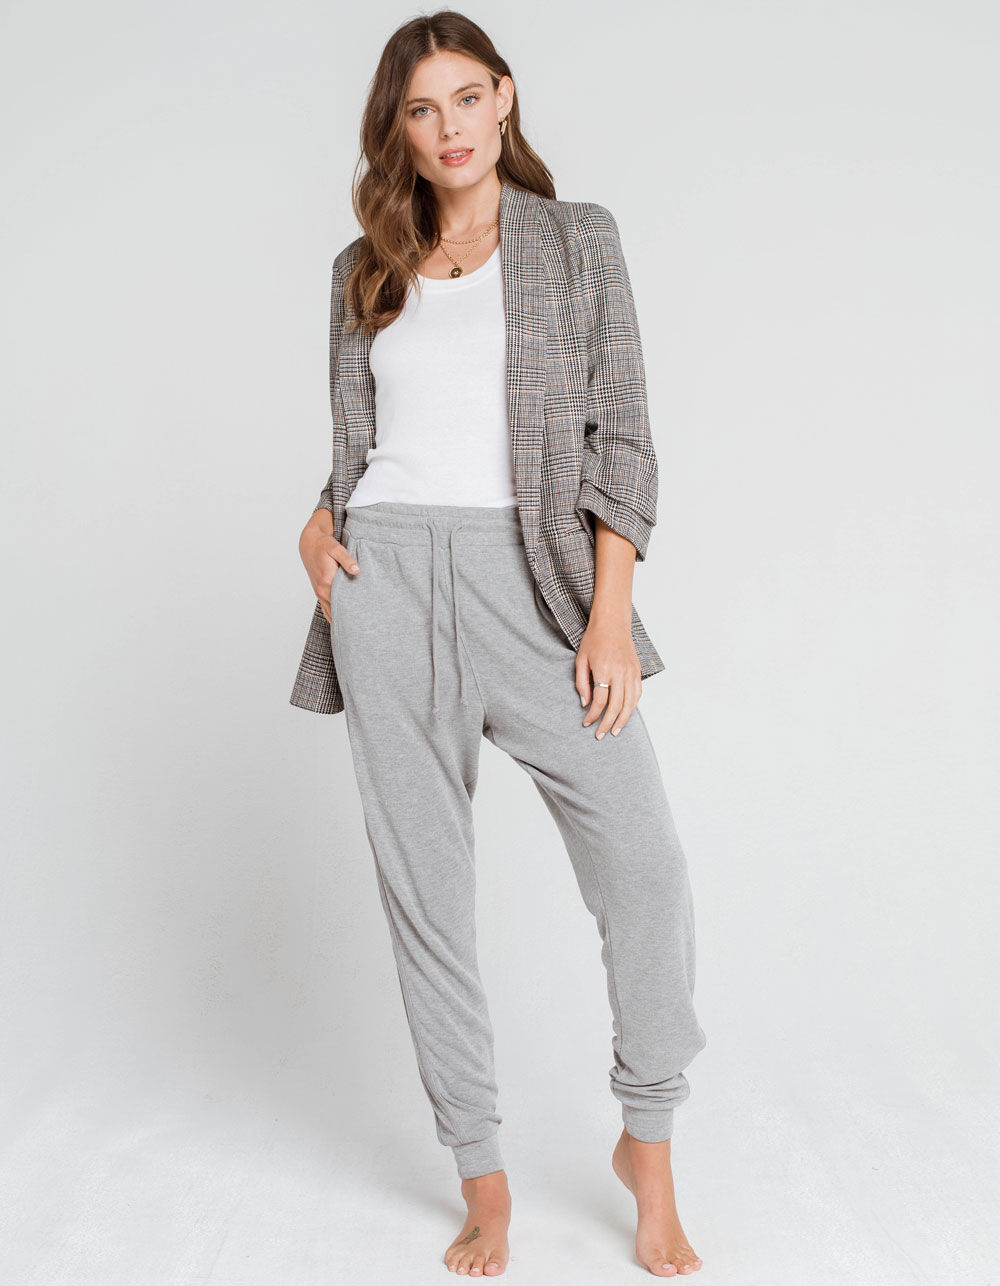 FREE PEOPLE Back Into It Womens Gray Jogger Sweatpants - GRAY | Tillys